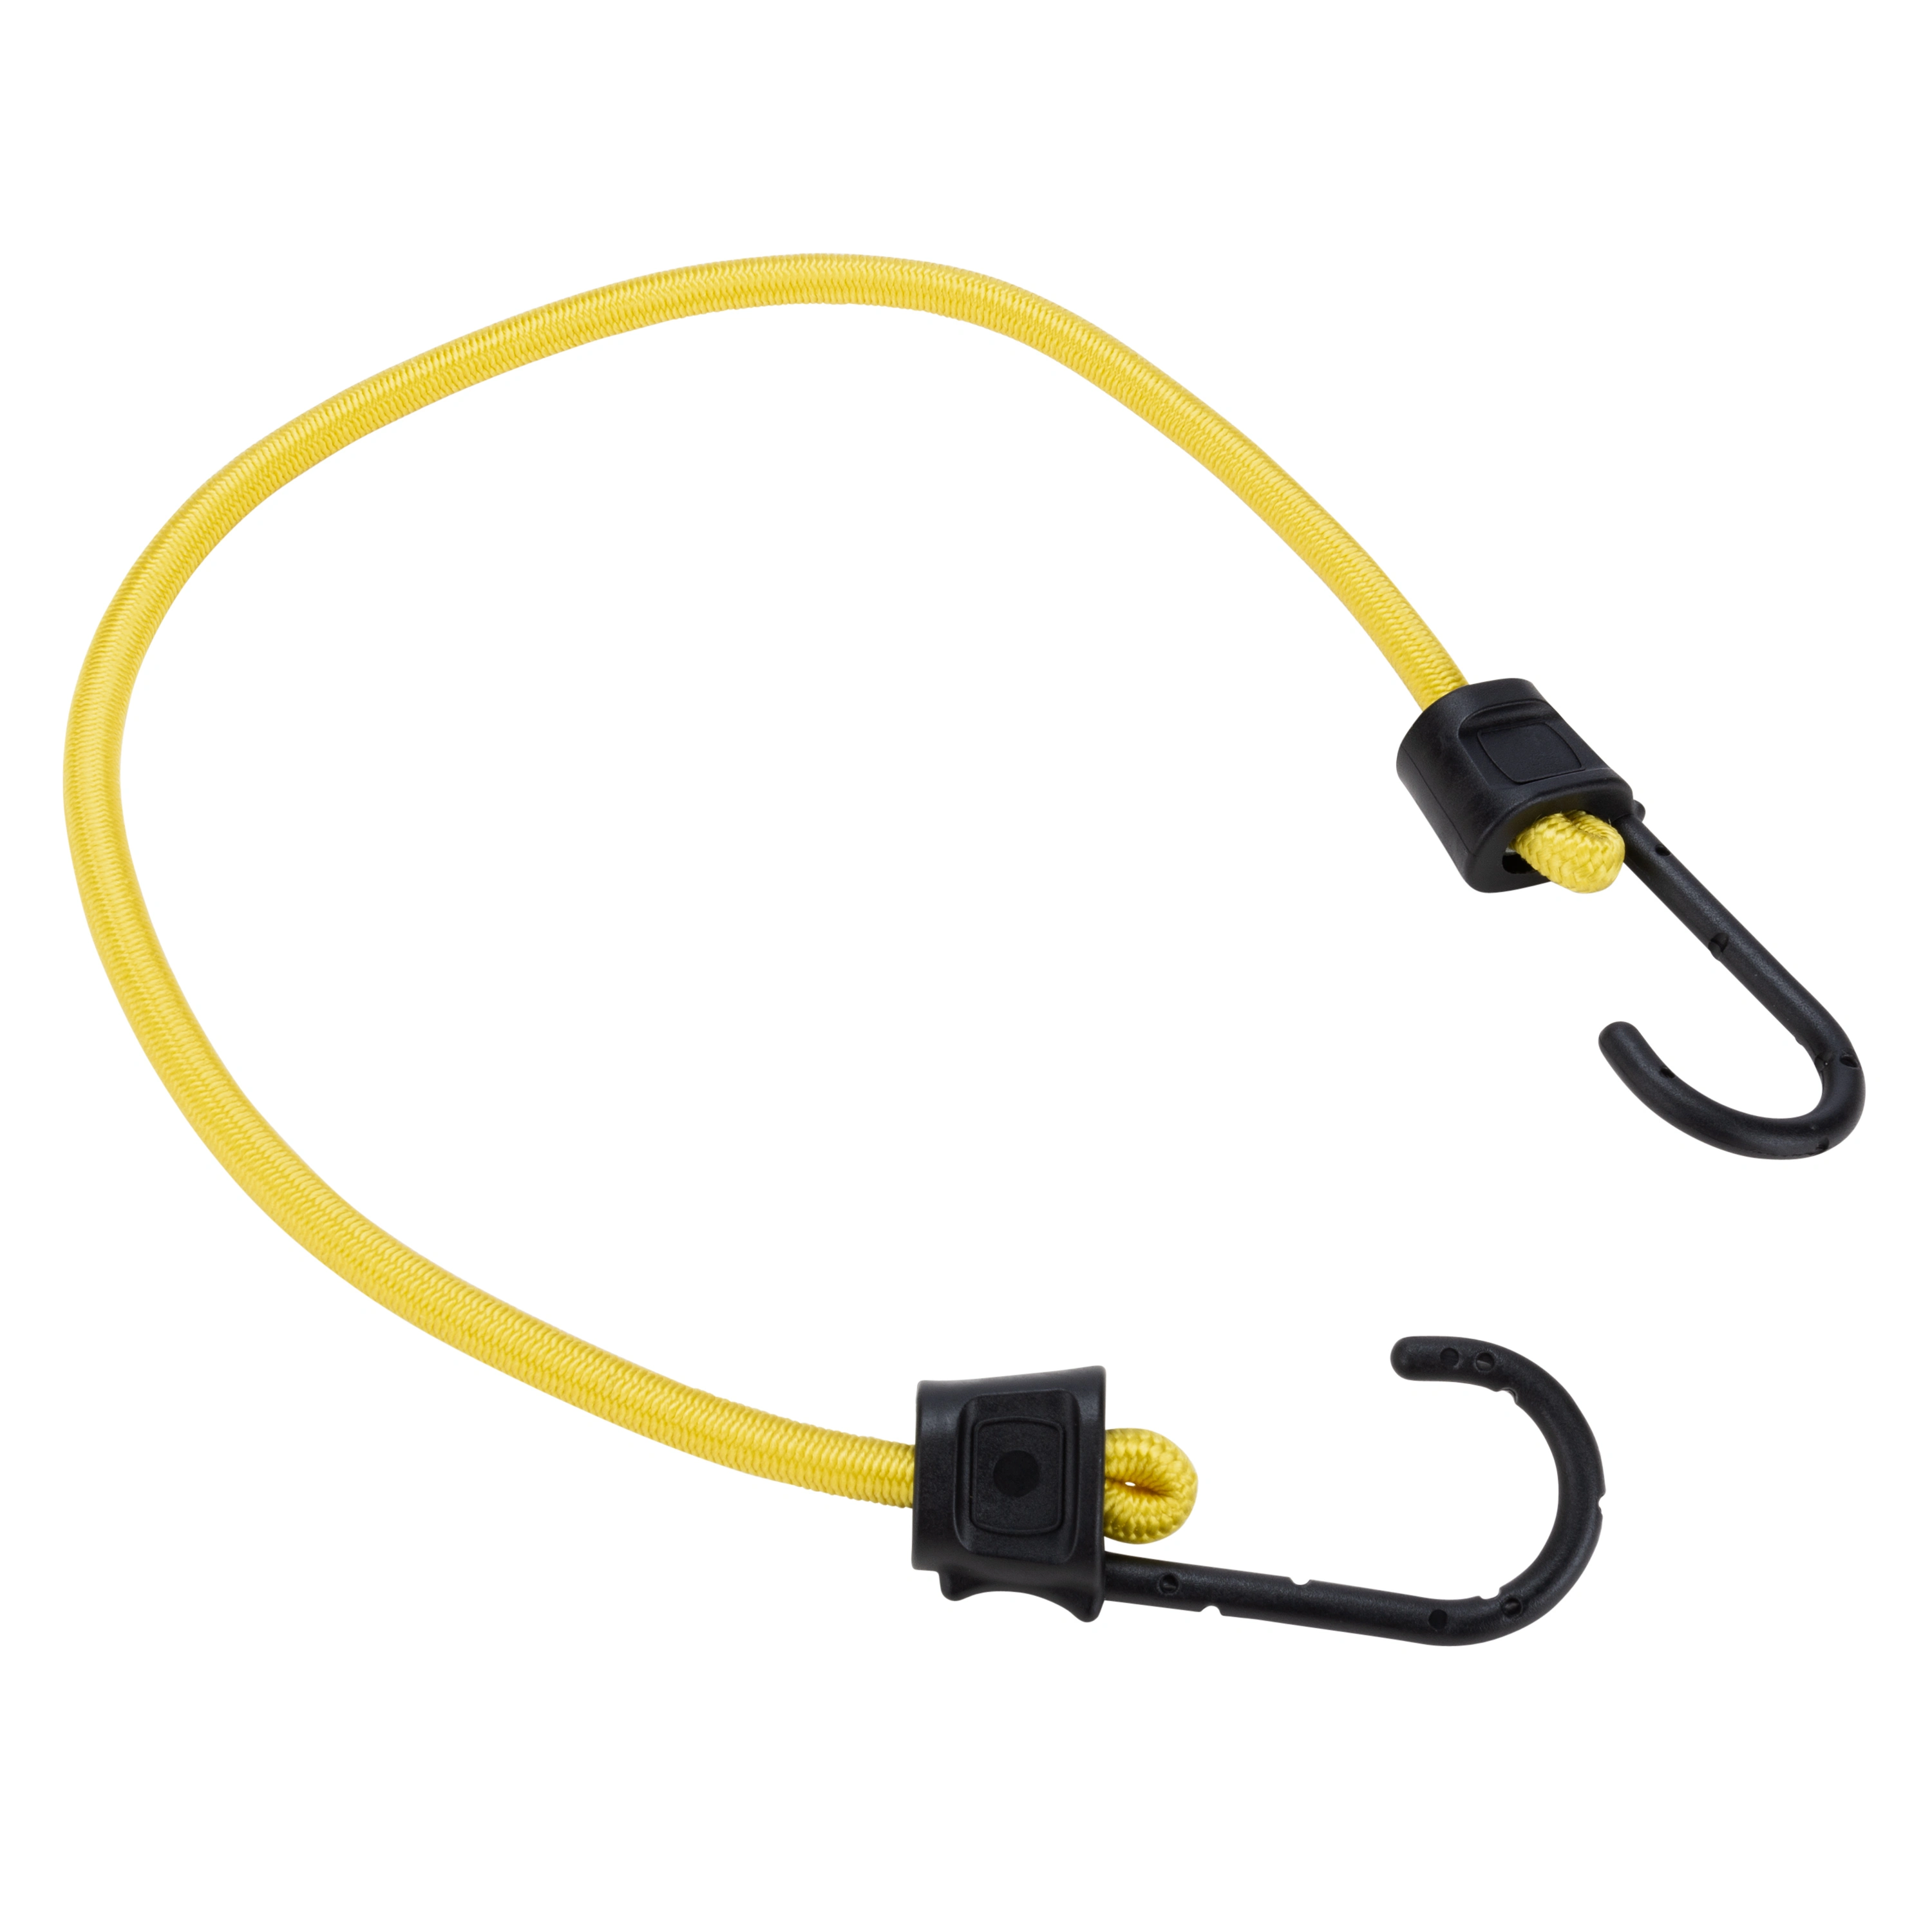 24" Bungee Cord, 4 Pack variant image view